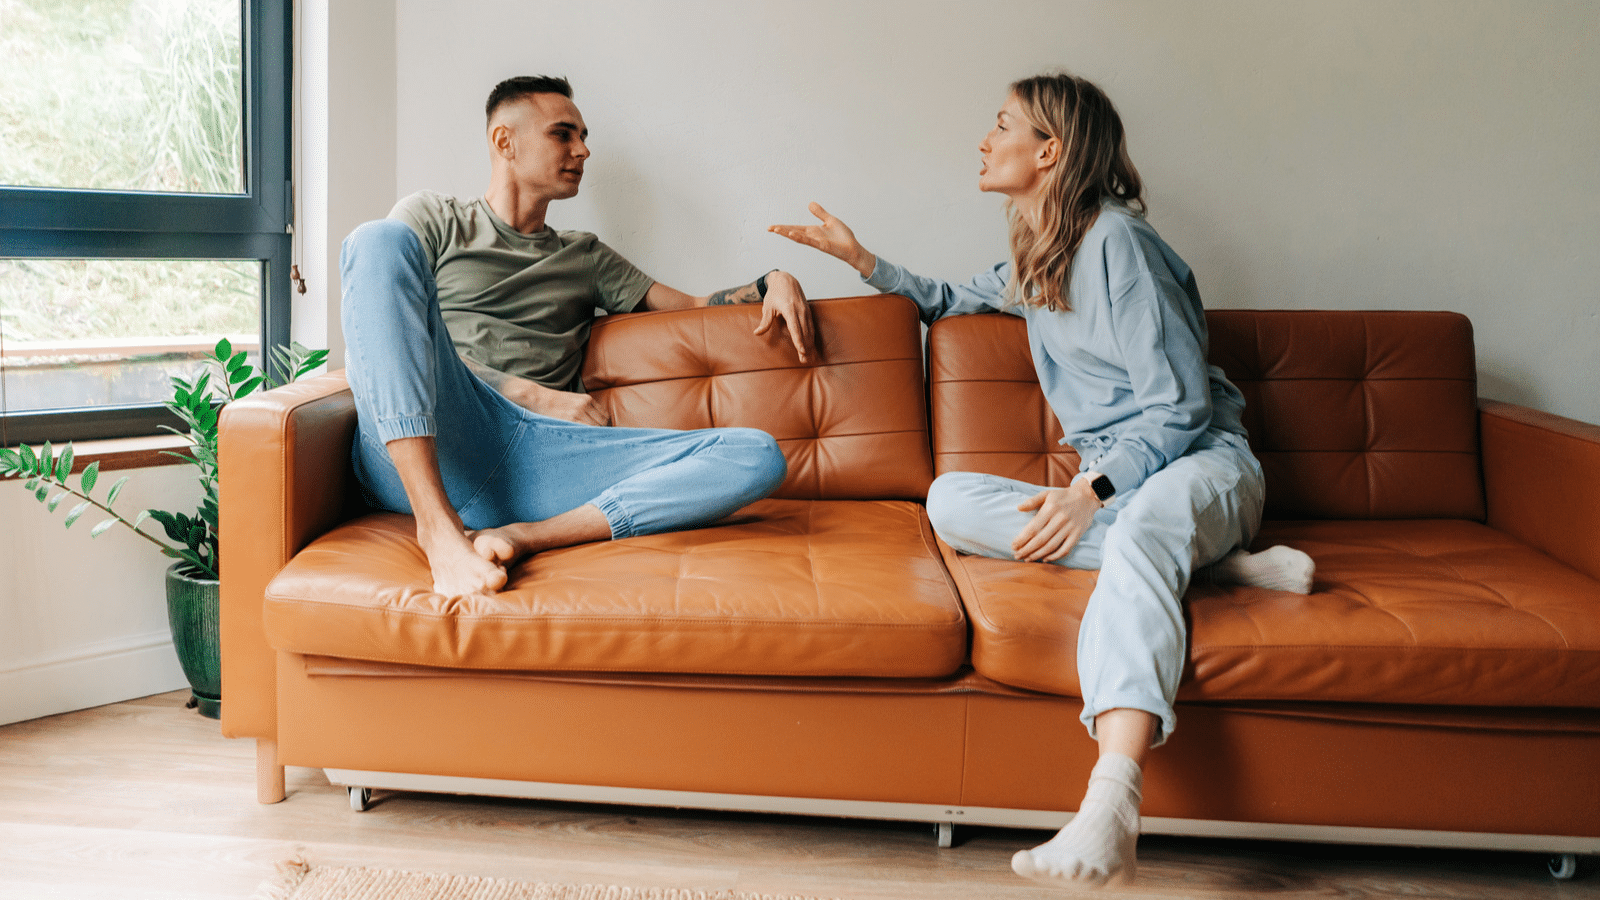 engaged couples dealing with stress